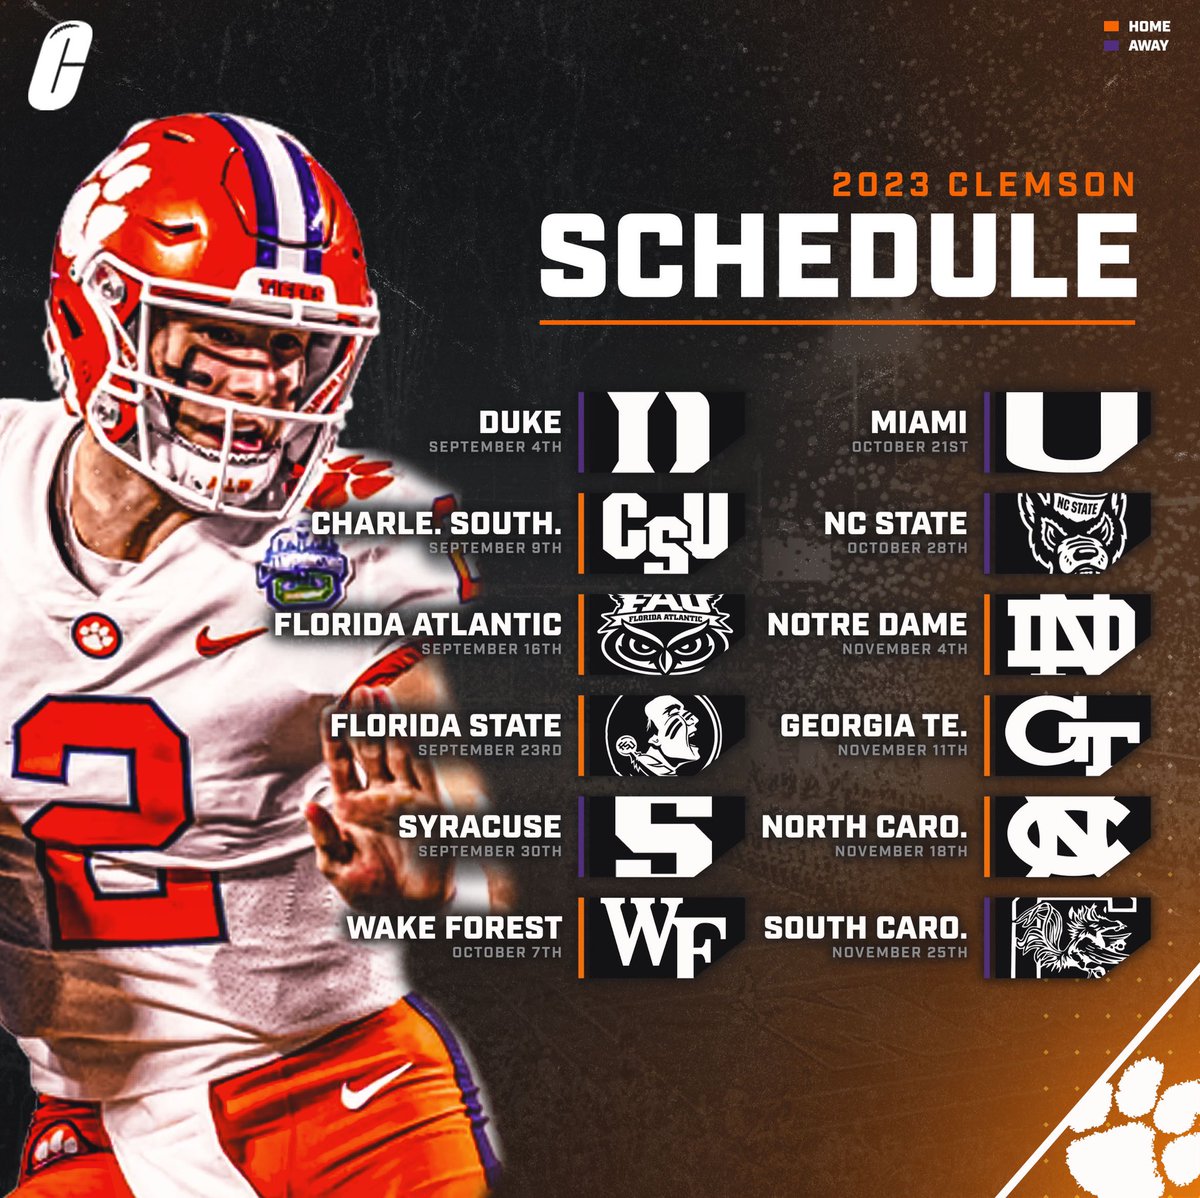 Clemson Tigers record this coming college football season will be ___?

#cfb #collegefootball #ncaaf #ncaa